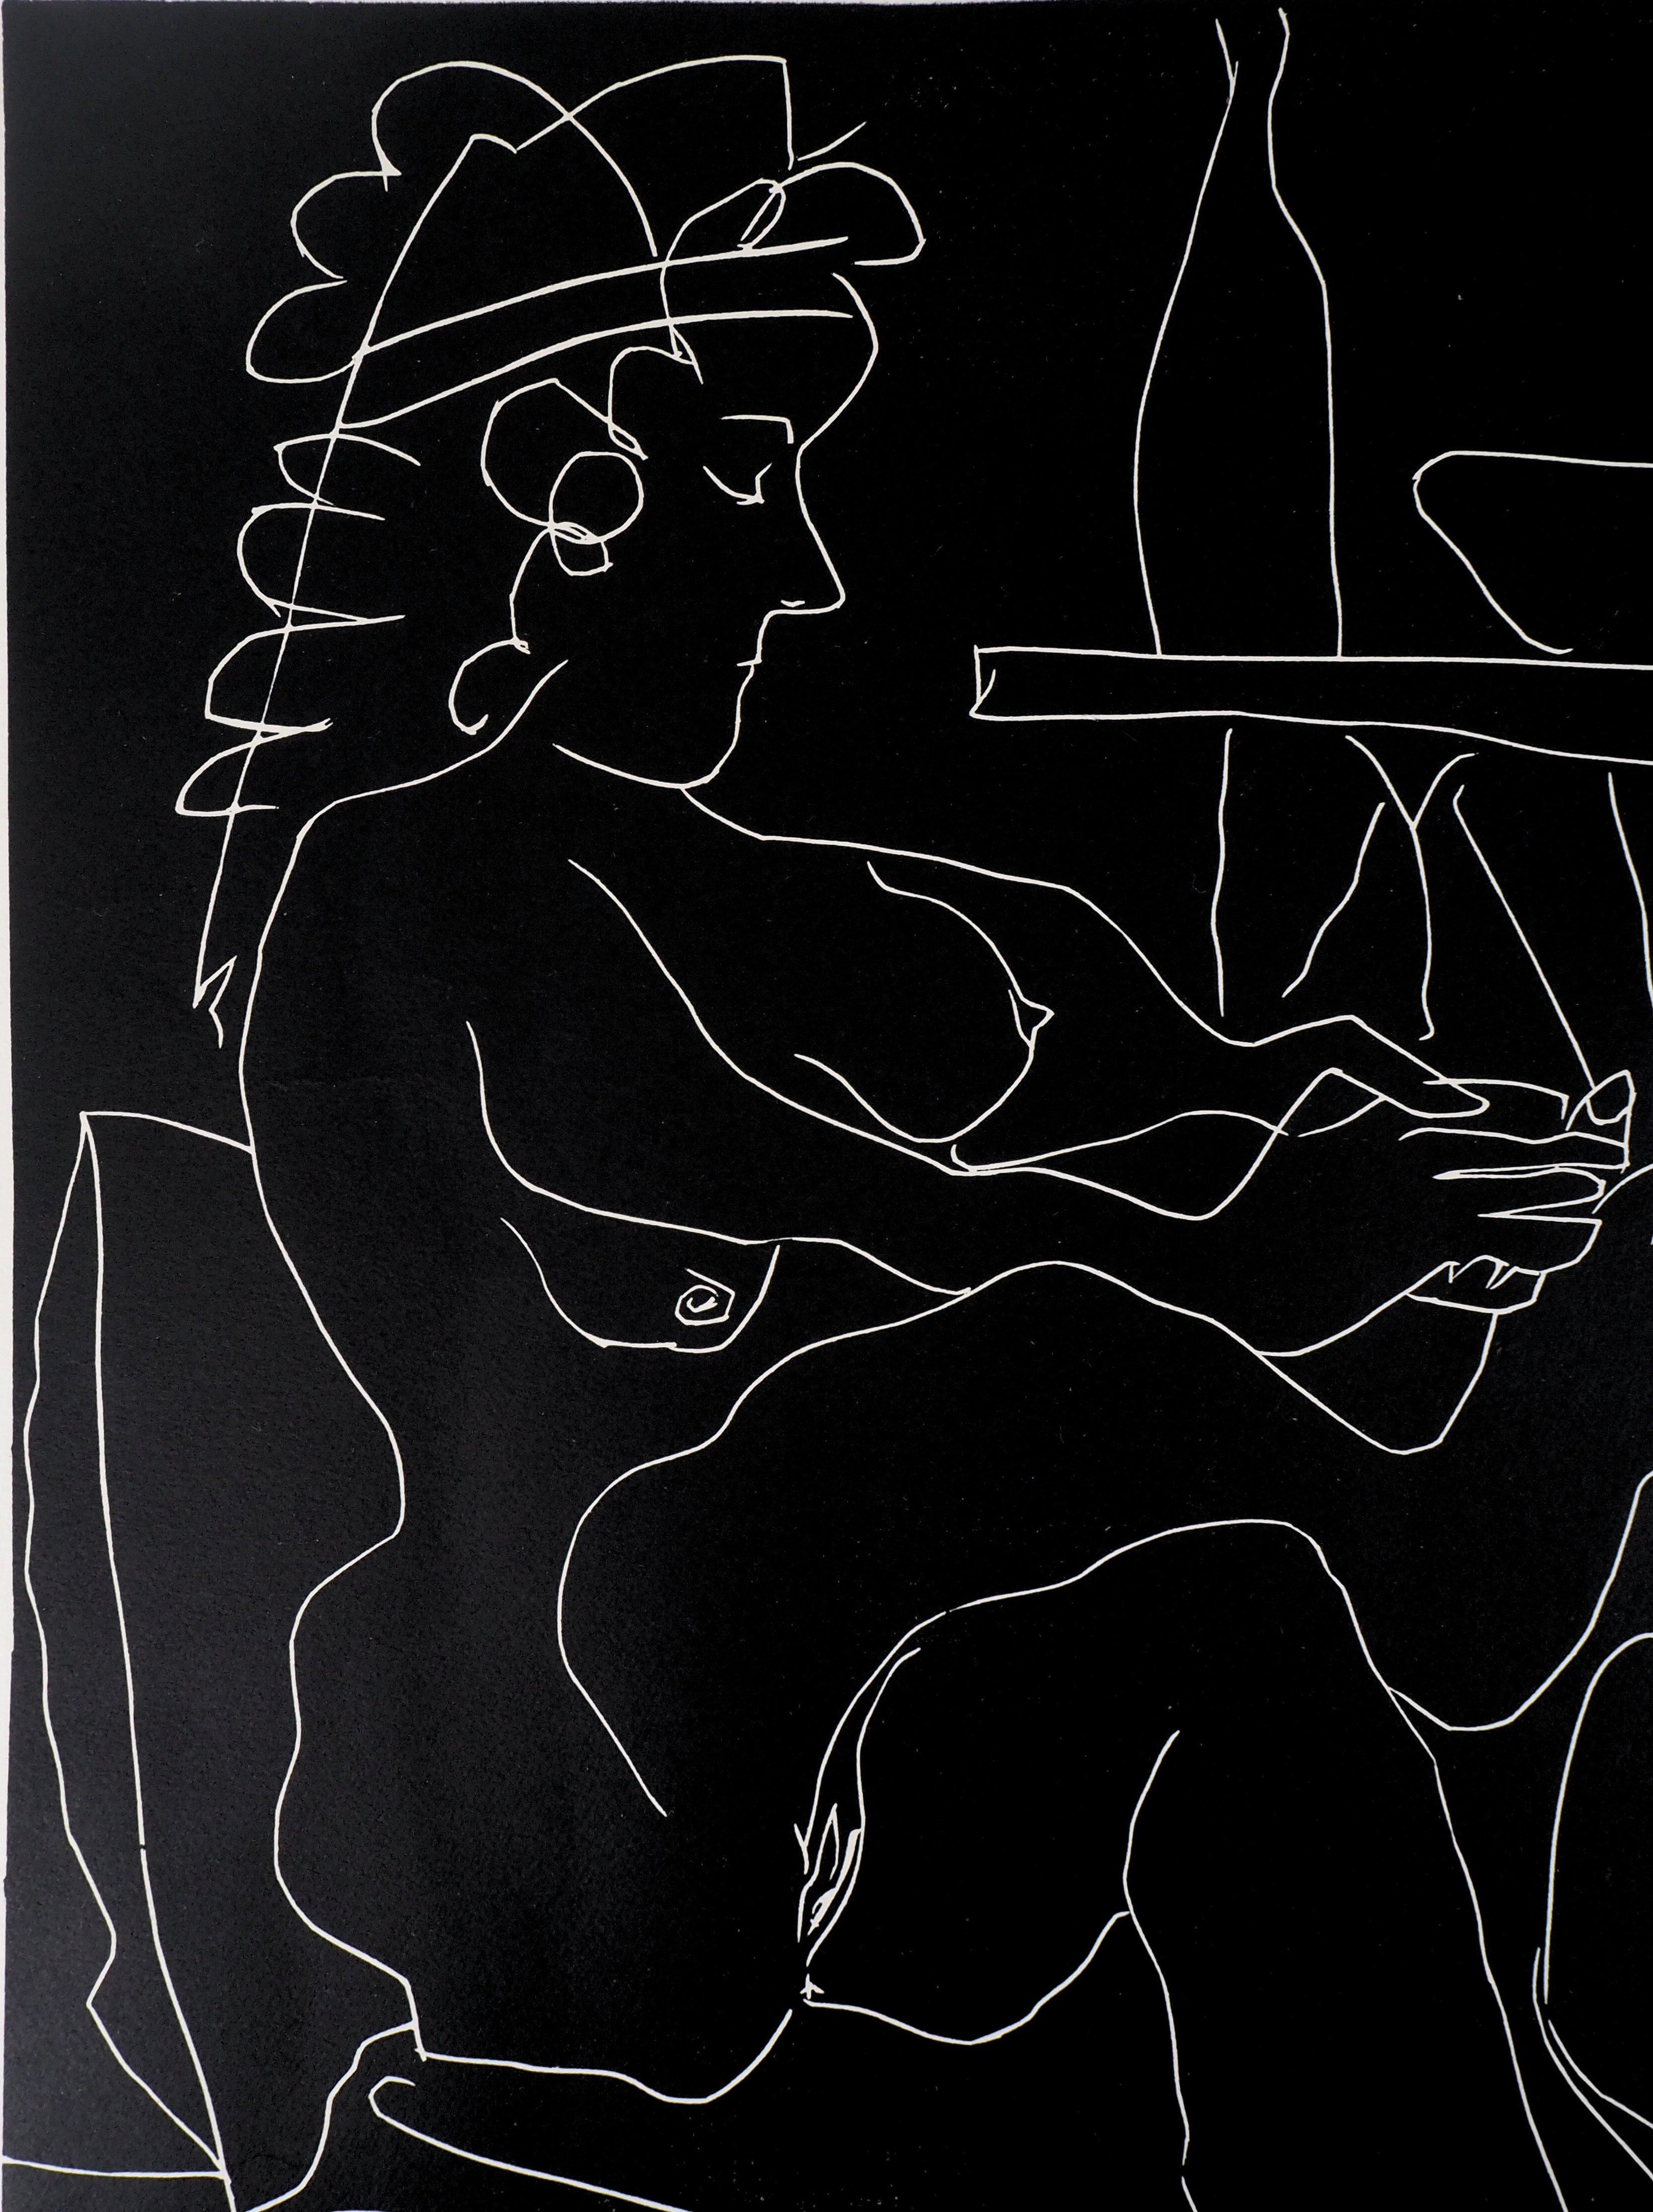 Painter and Model with Hat - Original linocut, Handsigned (ref. Bloch #1194) - Black Figurative Print by Pablo Picasso